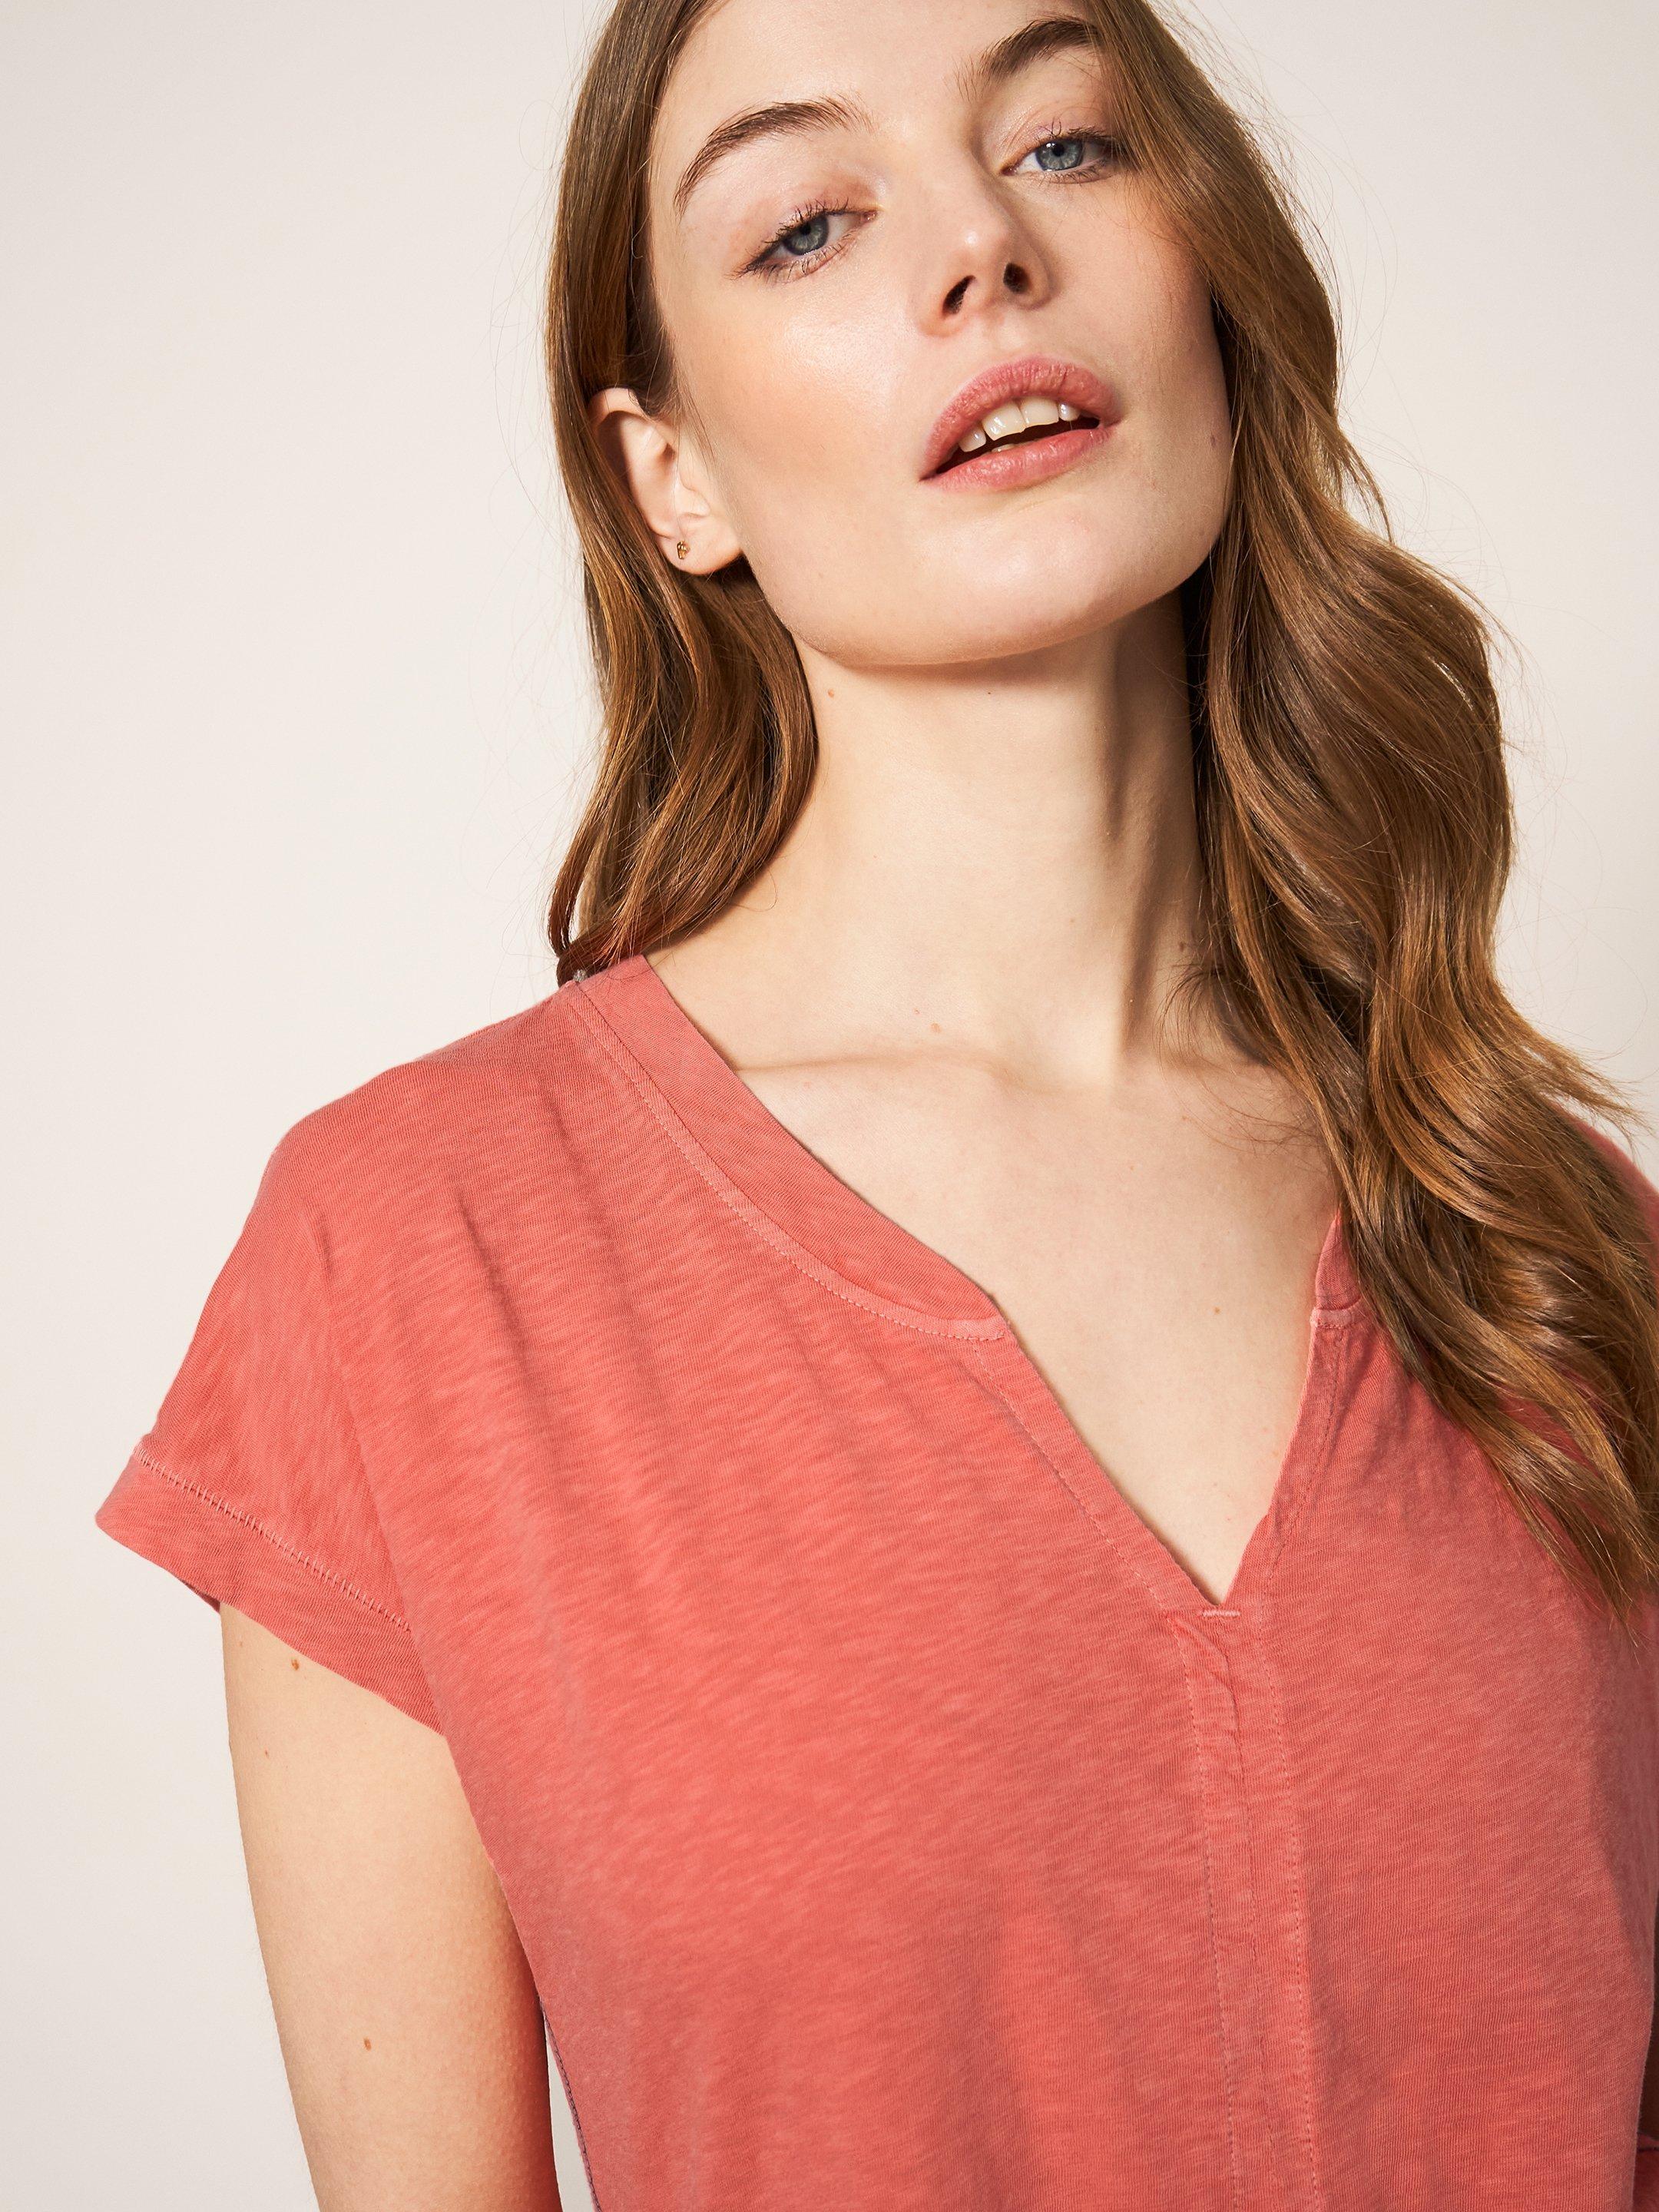 Nelly Notch Neck Tee in MID PINK - MODEL DETAIL